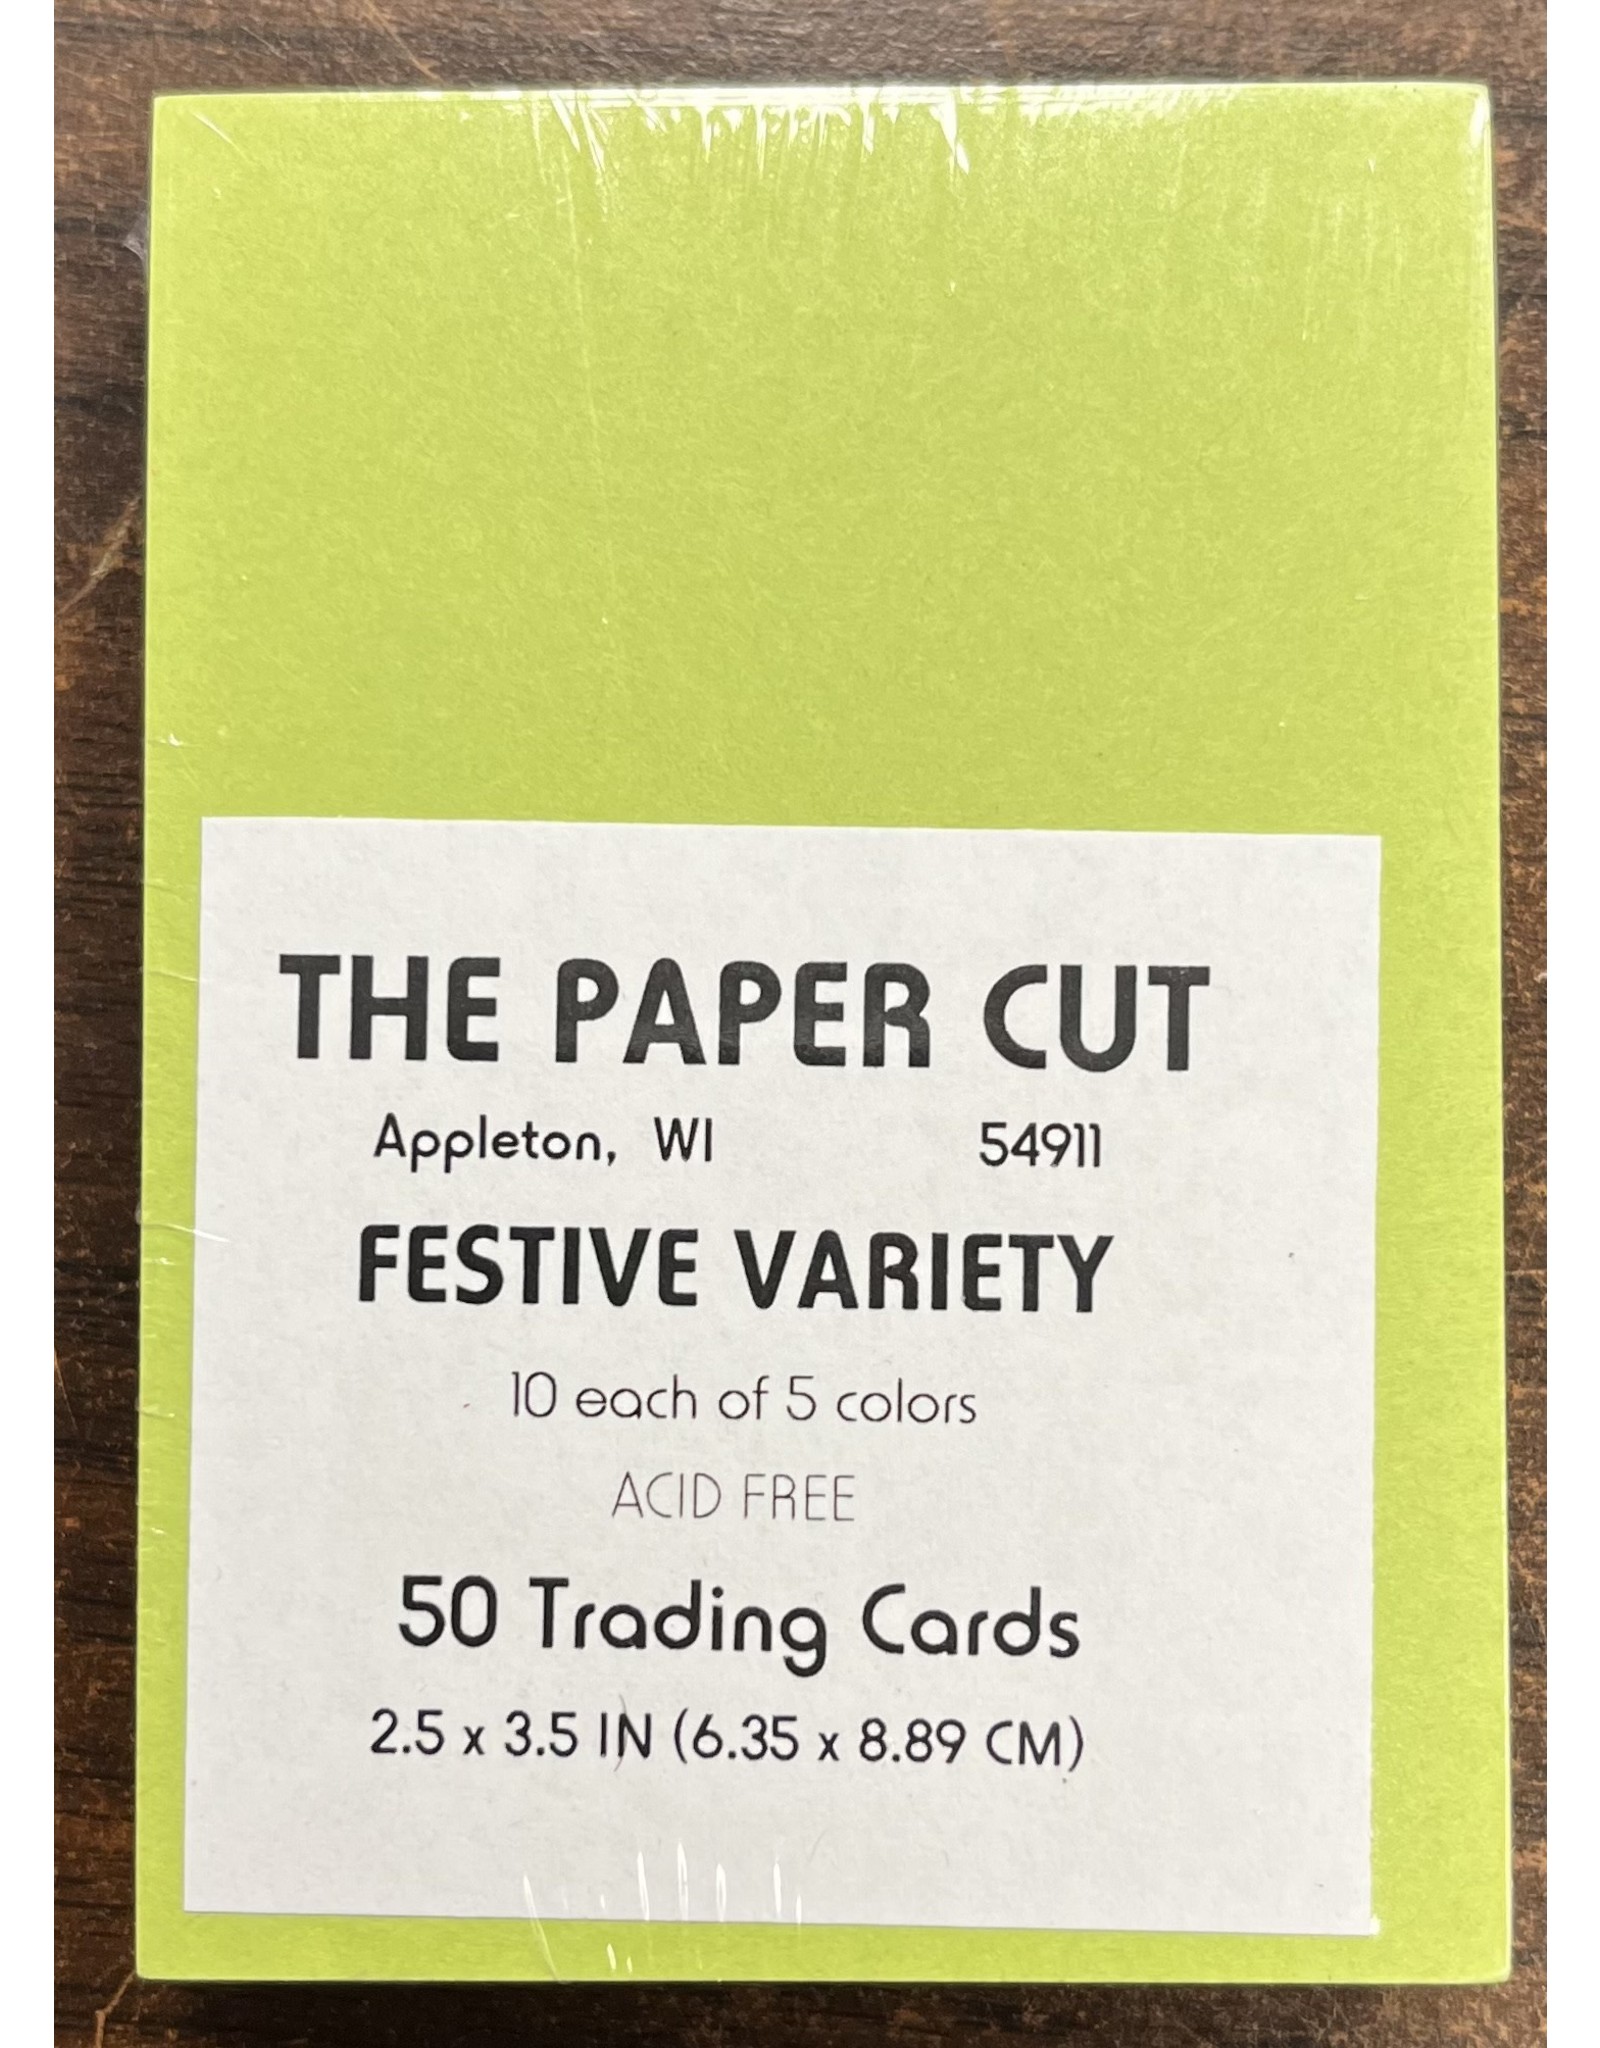 PAPER CUT THE PAPER CUT FESTIVE VARIETY TRADING CARDS 2.5x3.5 50/PK